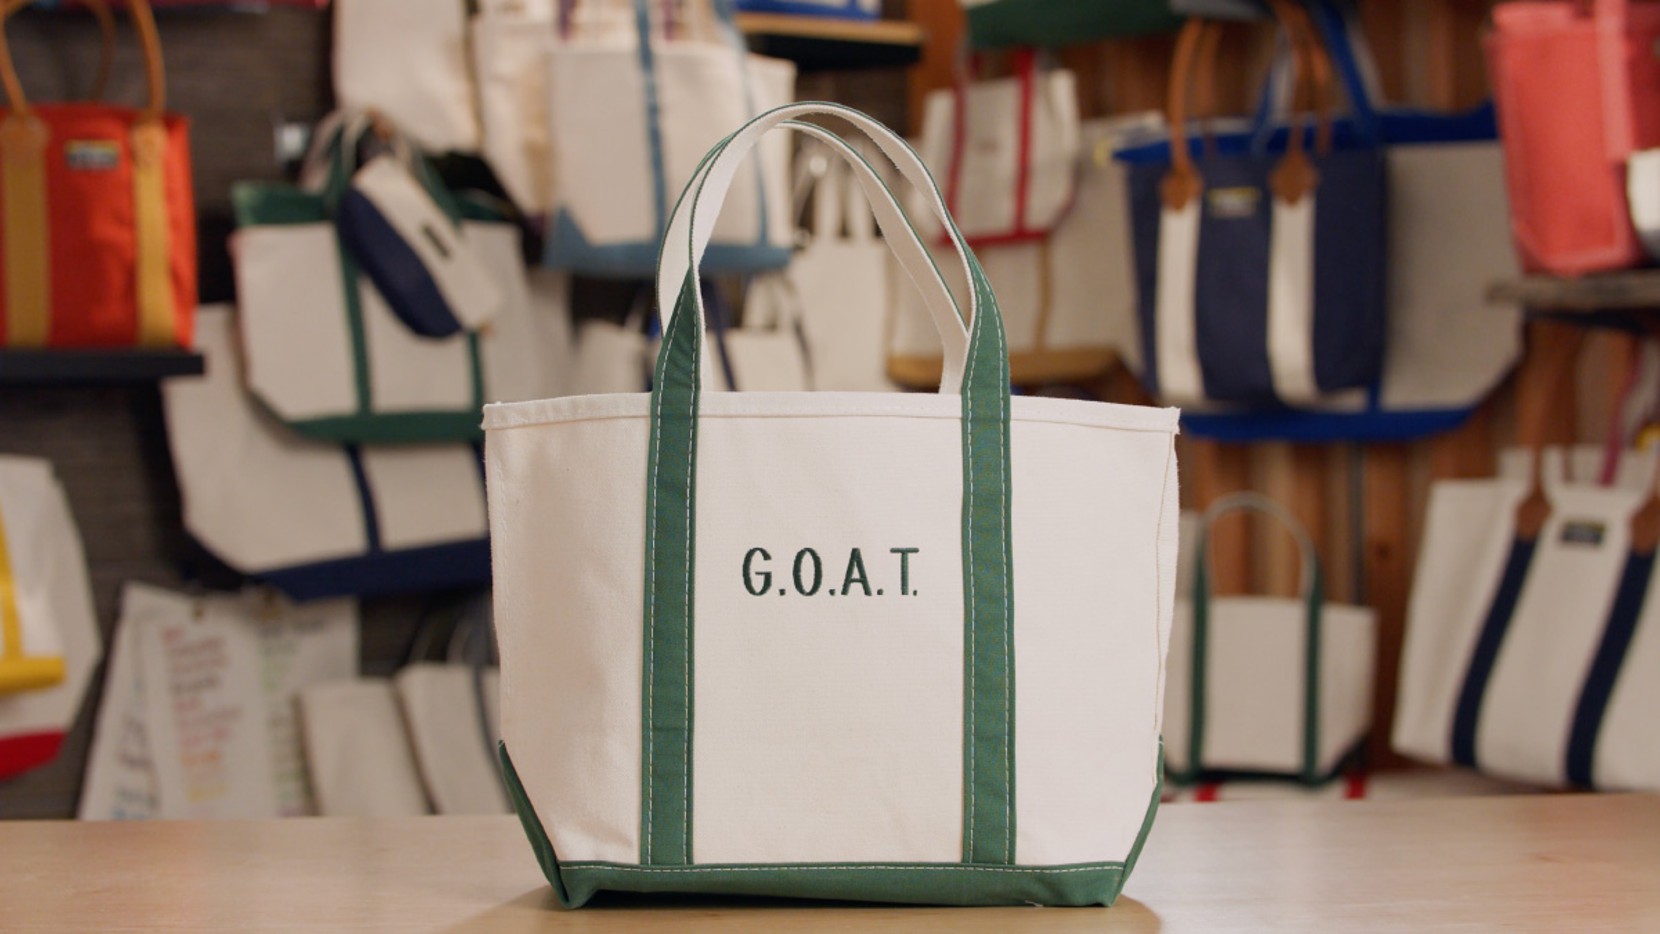 A Boat & Tote with green handles and a green monogram - "G.O.A.T."